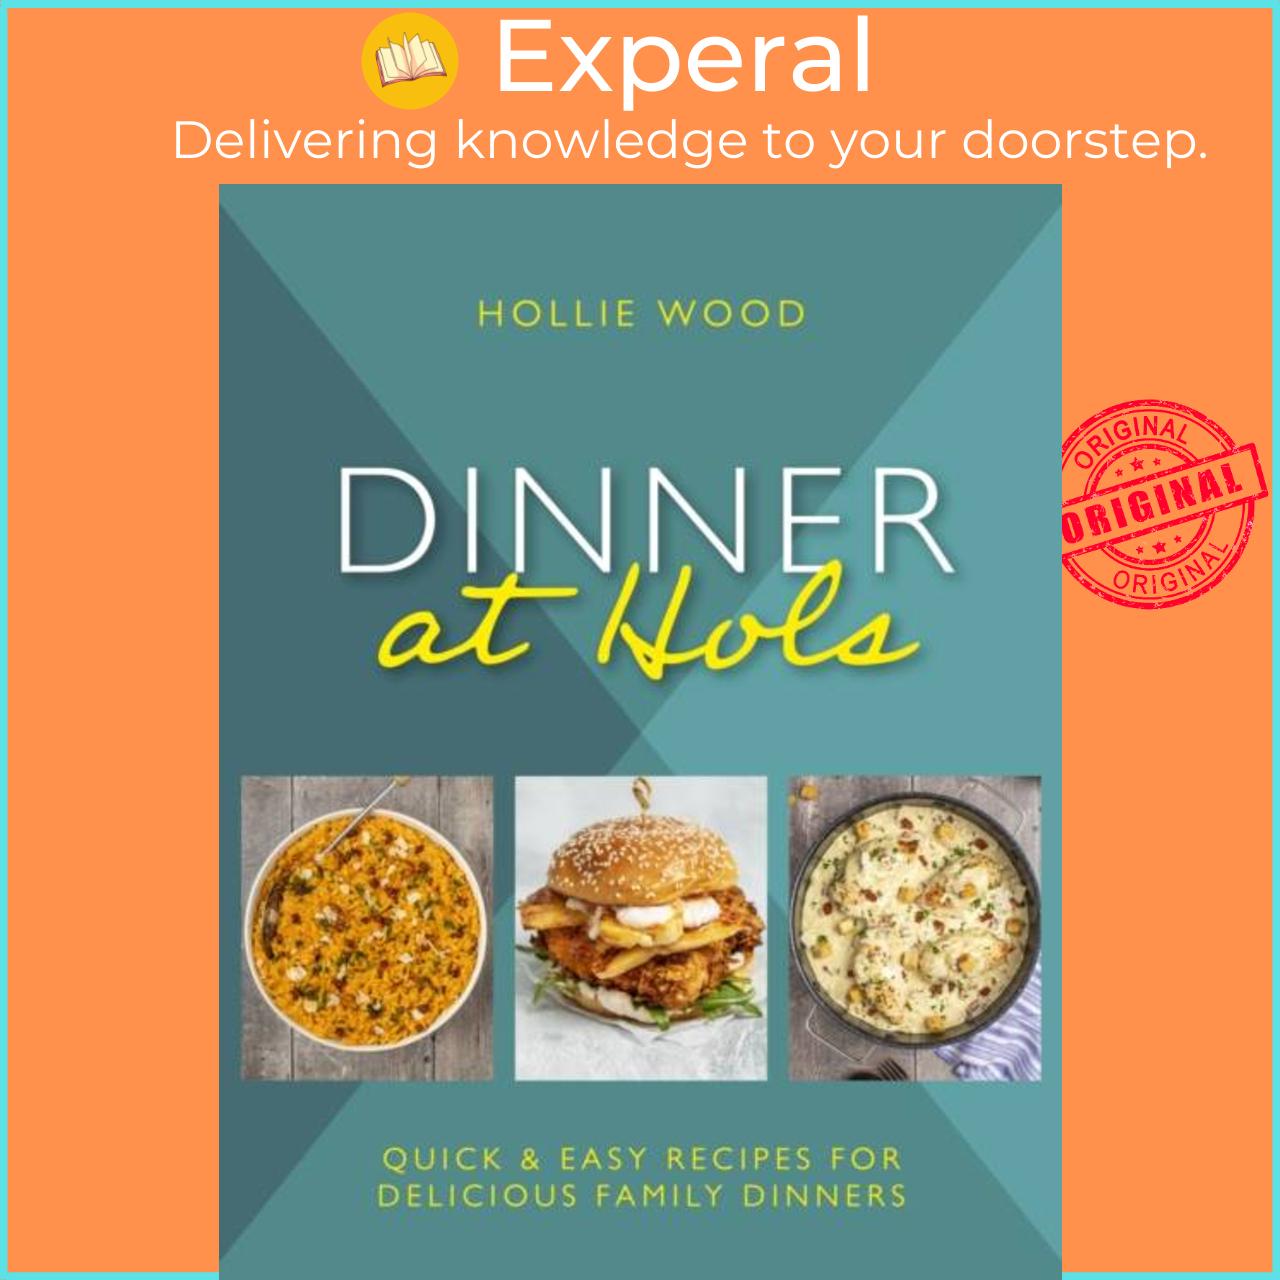 Sách - Dinner At Hol's - Quick and easy recipes for delicious family dinners by Hollie Wood (UK edition, hardcover)